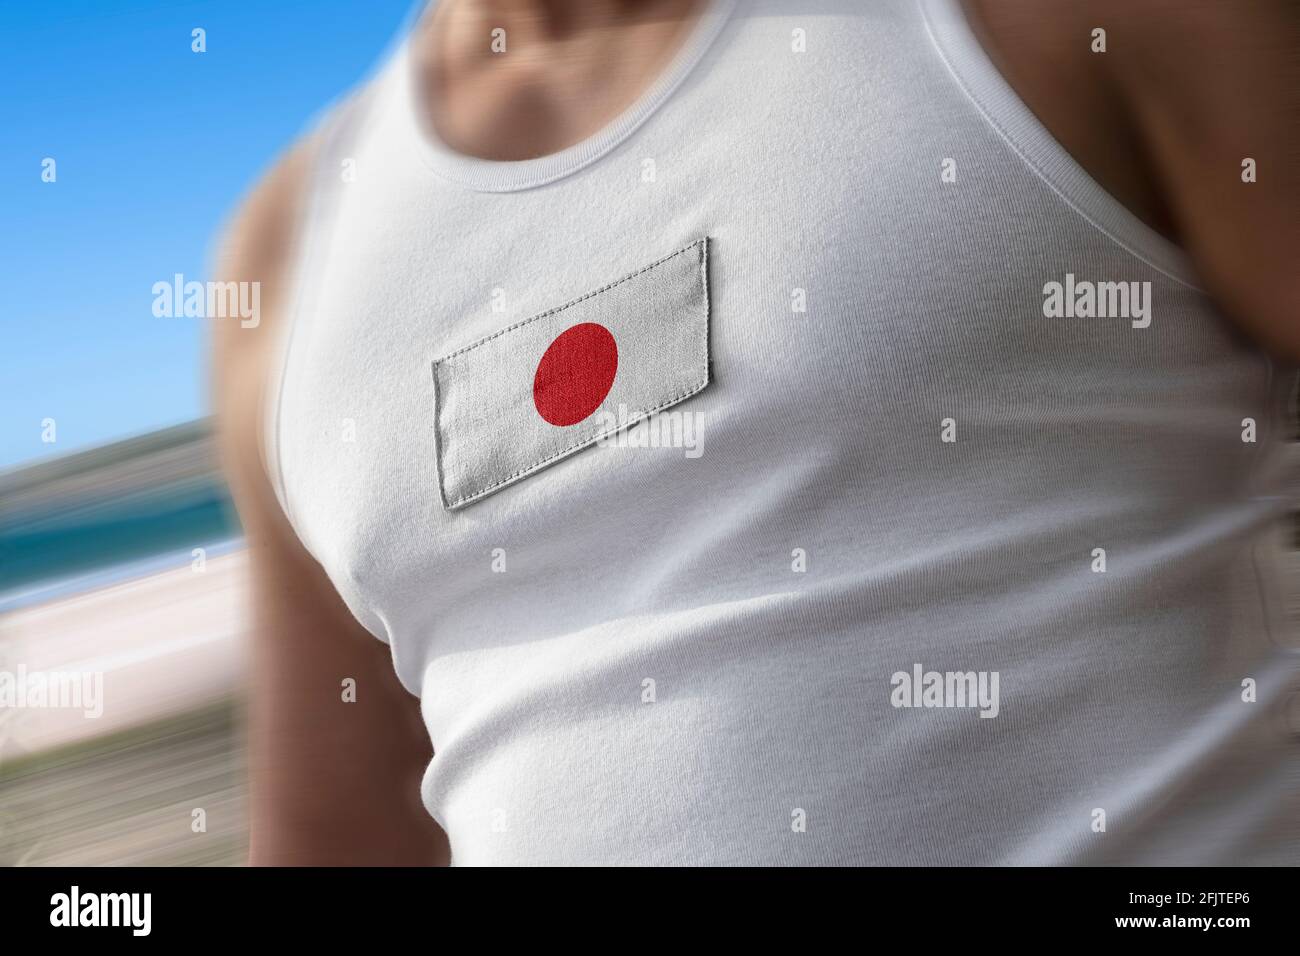 The national flag of Japan on the athlete's chest Stock Photo